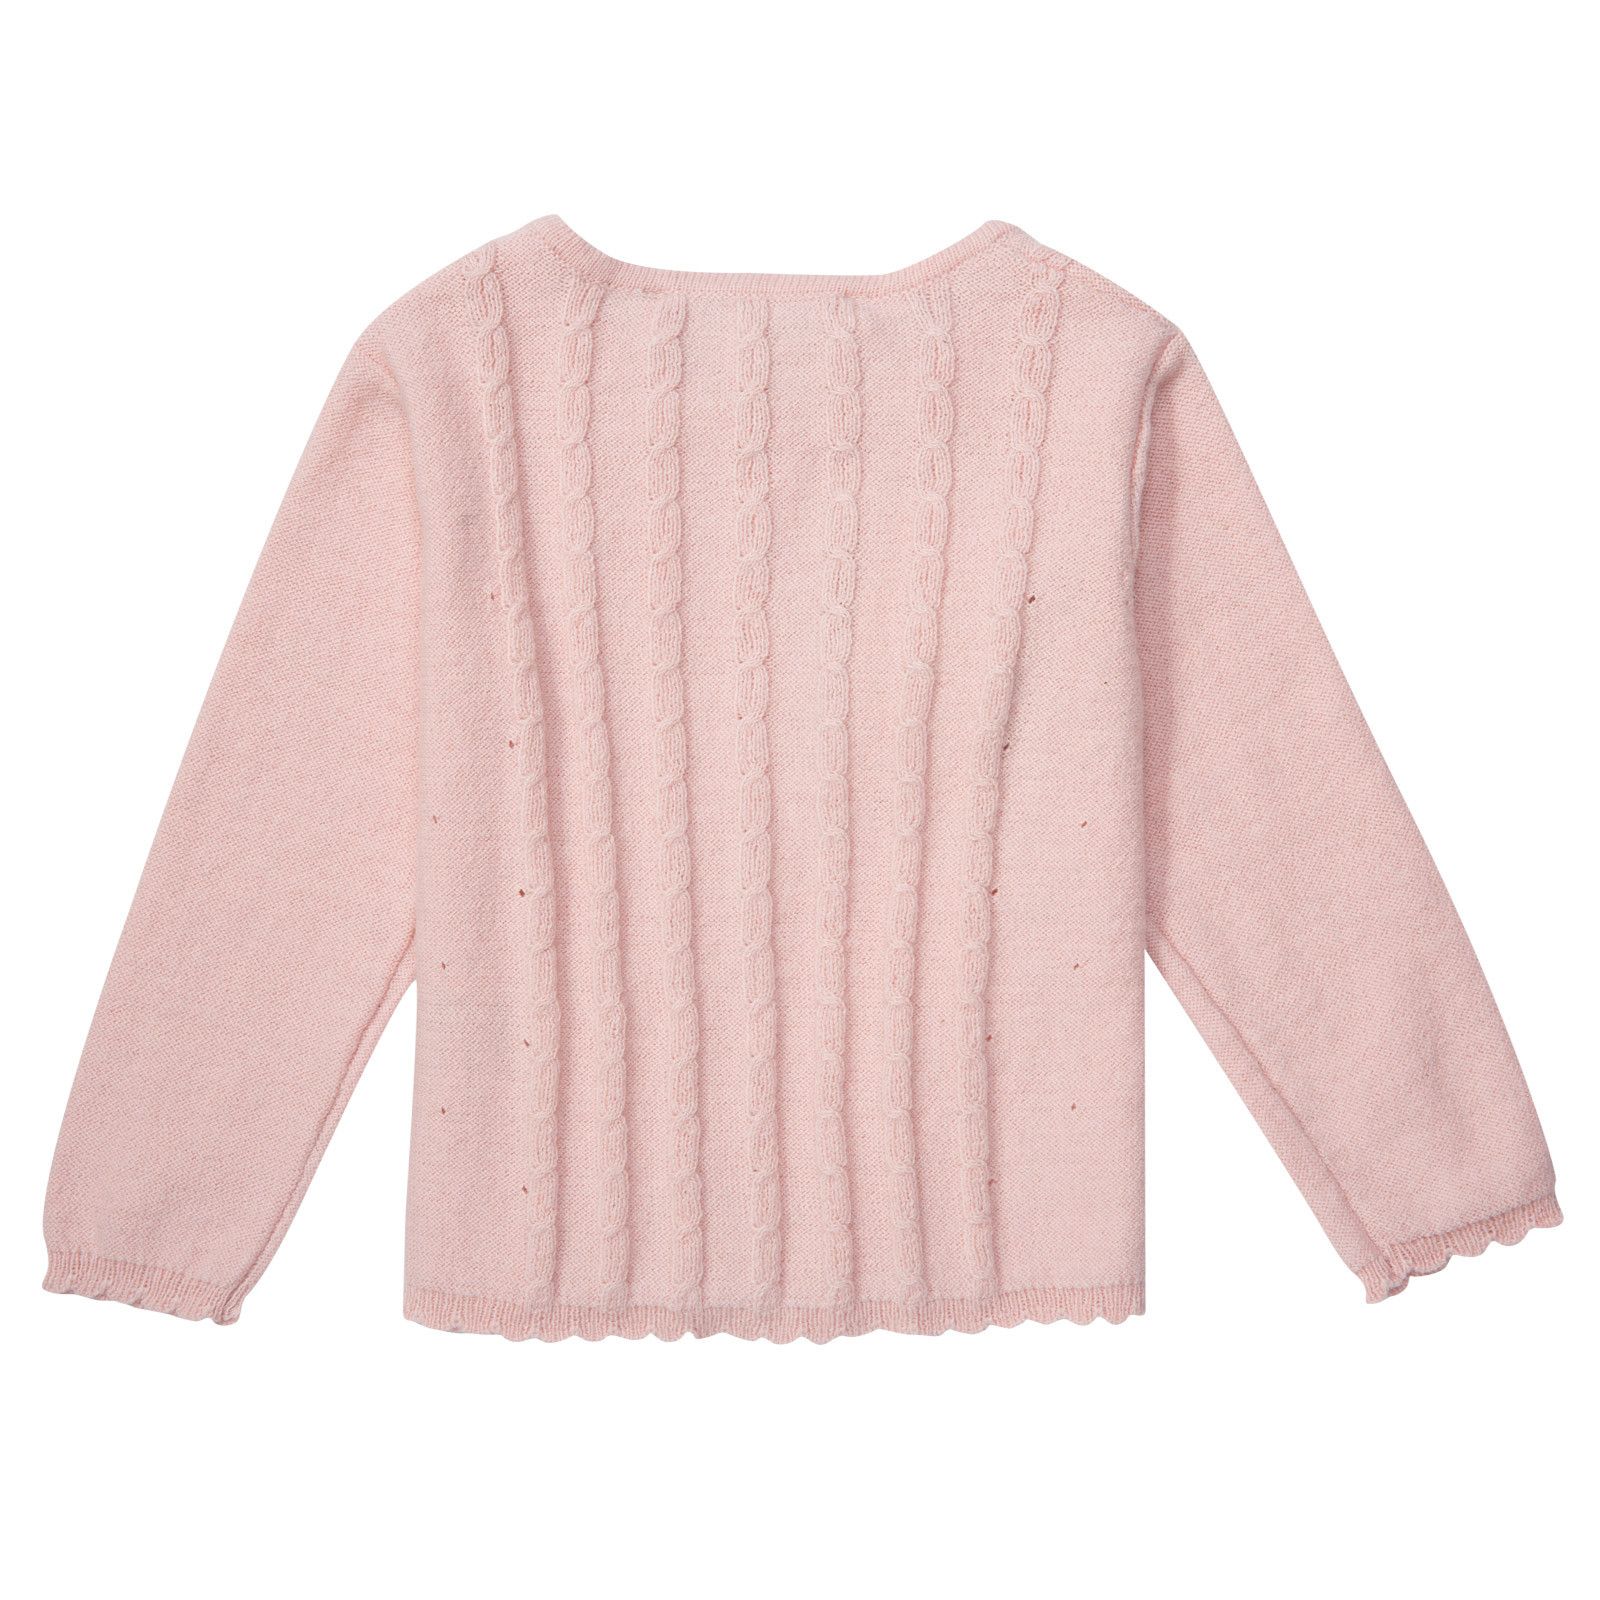 Baby Girls Pink Knitted Cardigan With Bow Trims - CÉMAROSE | Children's Fashion Store - 2